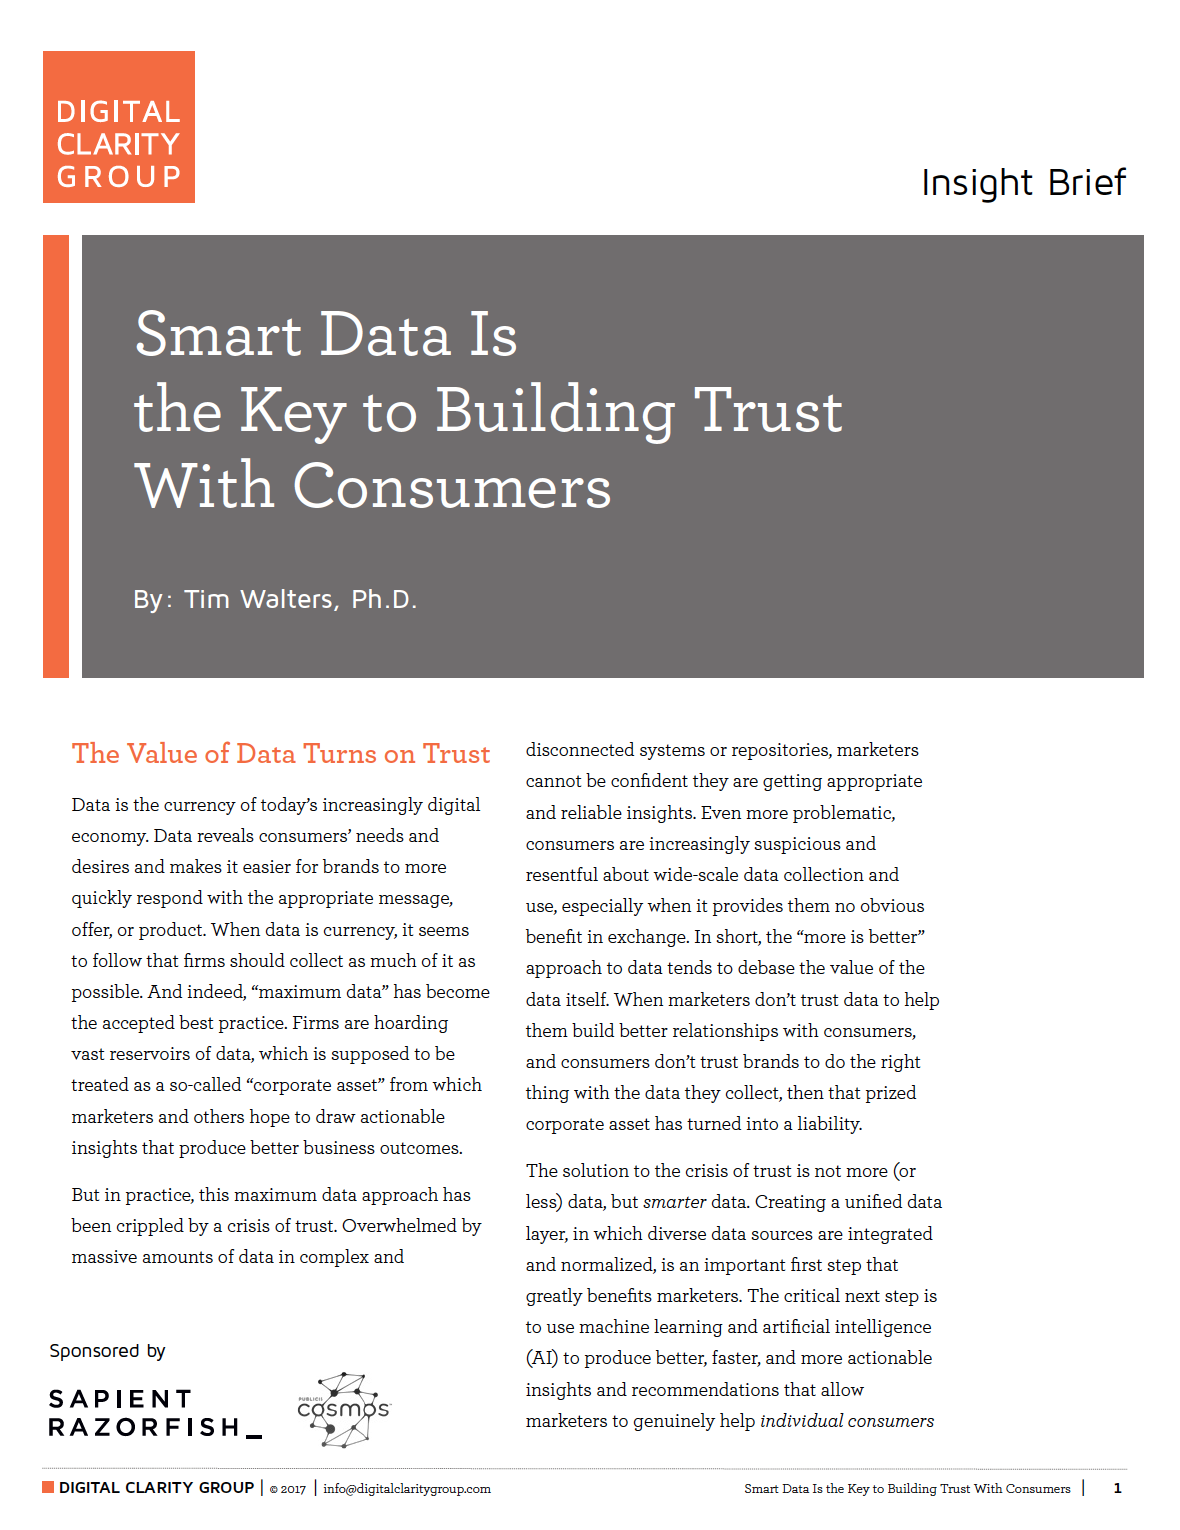 Cover of the report entitled Smart Data is the Key to Building Trust with Consumers